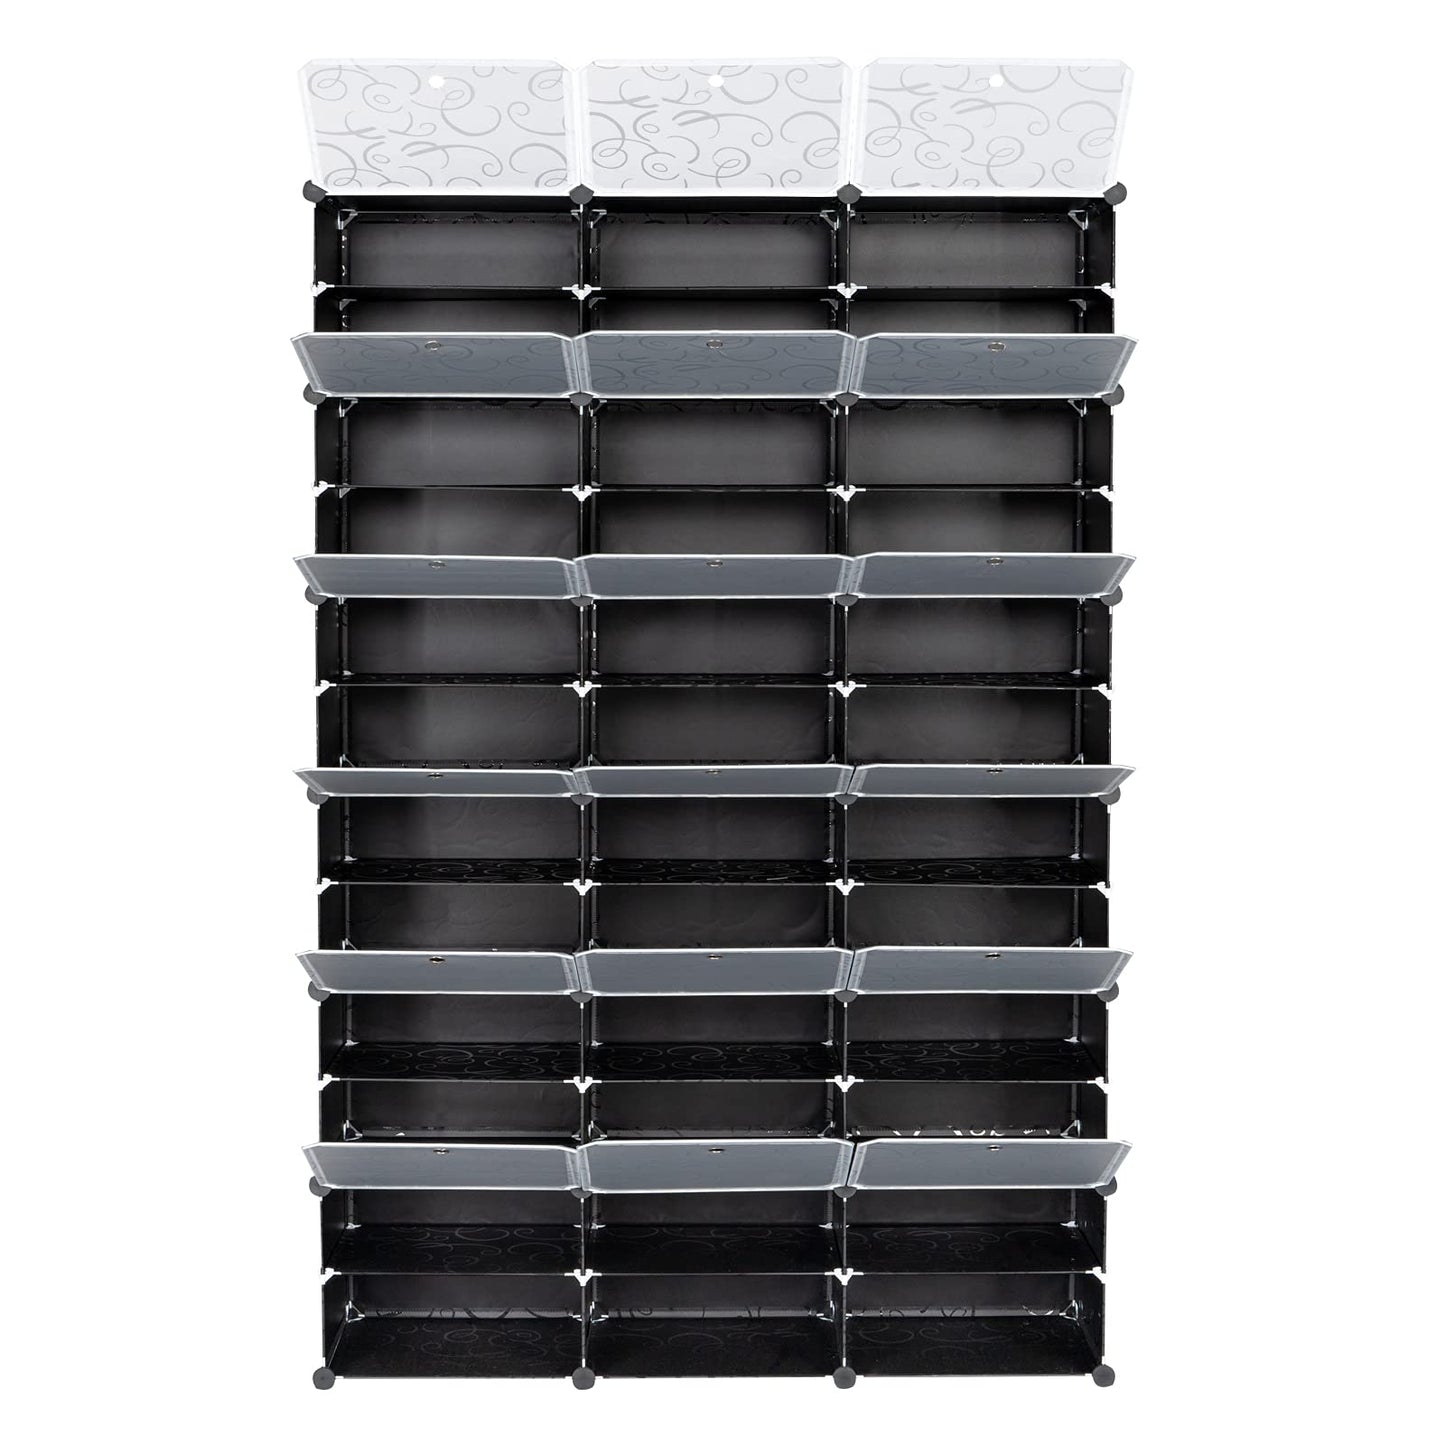 Portable 36 Compartment Shoe Rack Organizer 72 Twin Tower Storage Cabinet Stand Expandable for Heels, Boots, Slippers, 12 Tier Black and White Doors